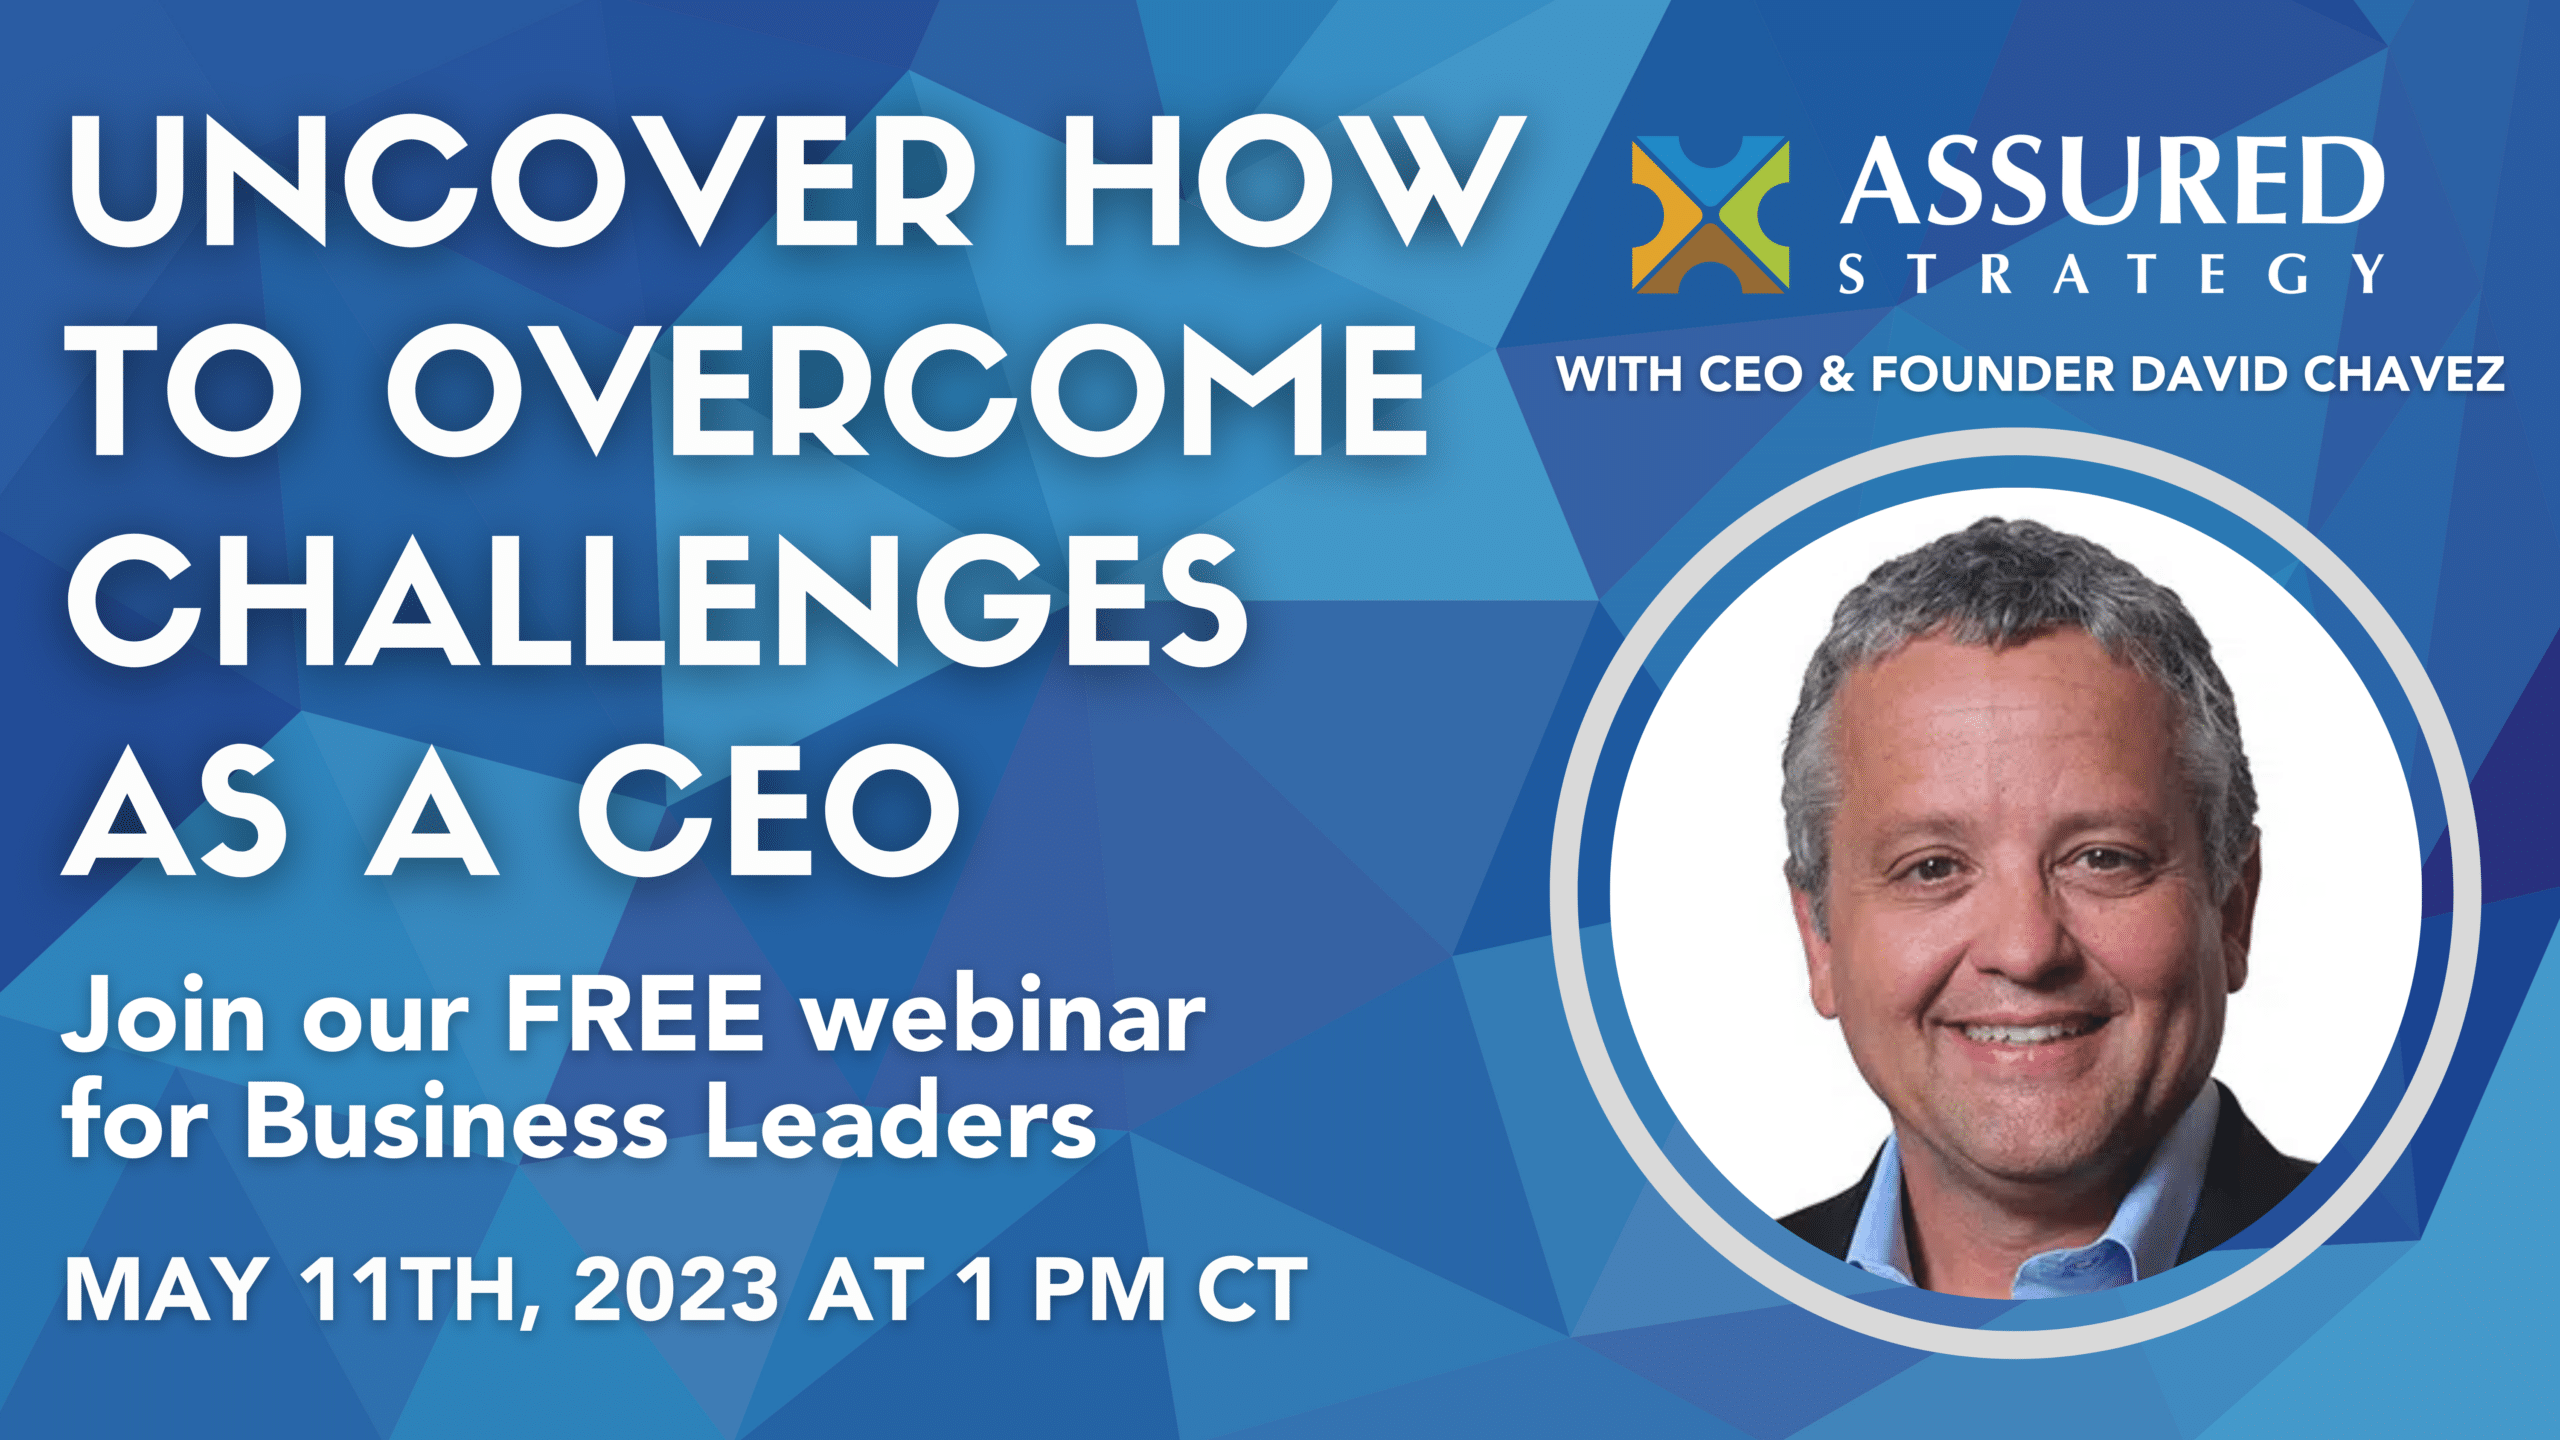 Free Webinar: What Makes the CEO’s Job Challenging and How to Mitigate Those Challenges – May 11th from 1-2pm CT